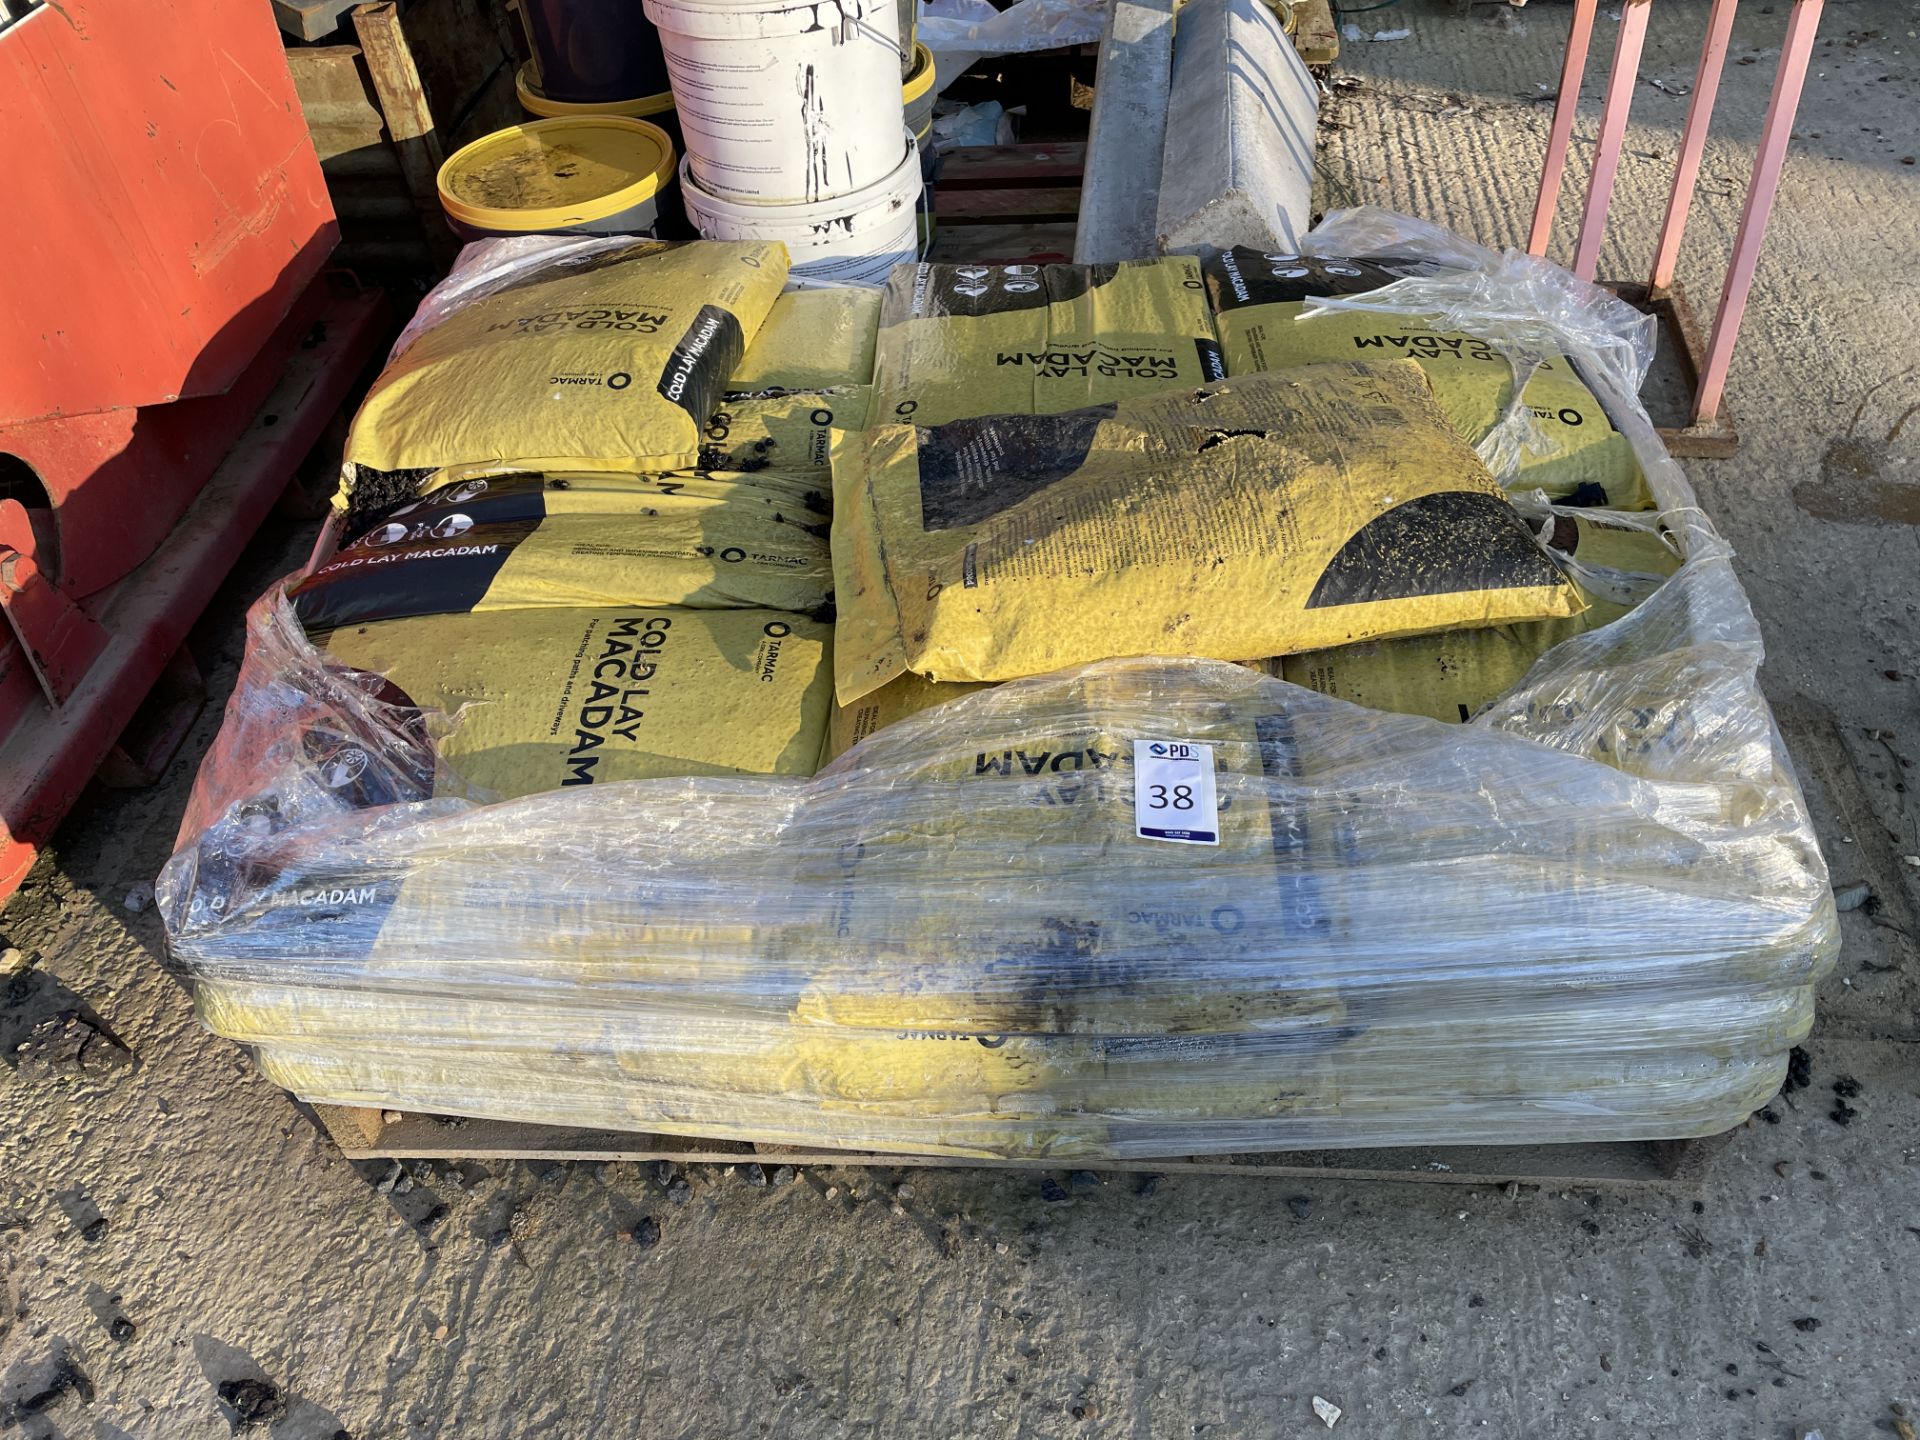 Pallet of 25Kg Bags Cold Lay Macadam & 8 Tubs Tarmac “Ultipatch” Footway (Location: March,